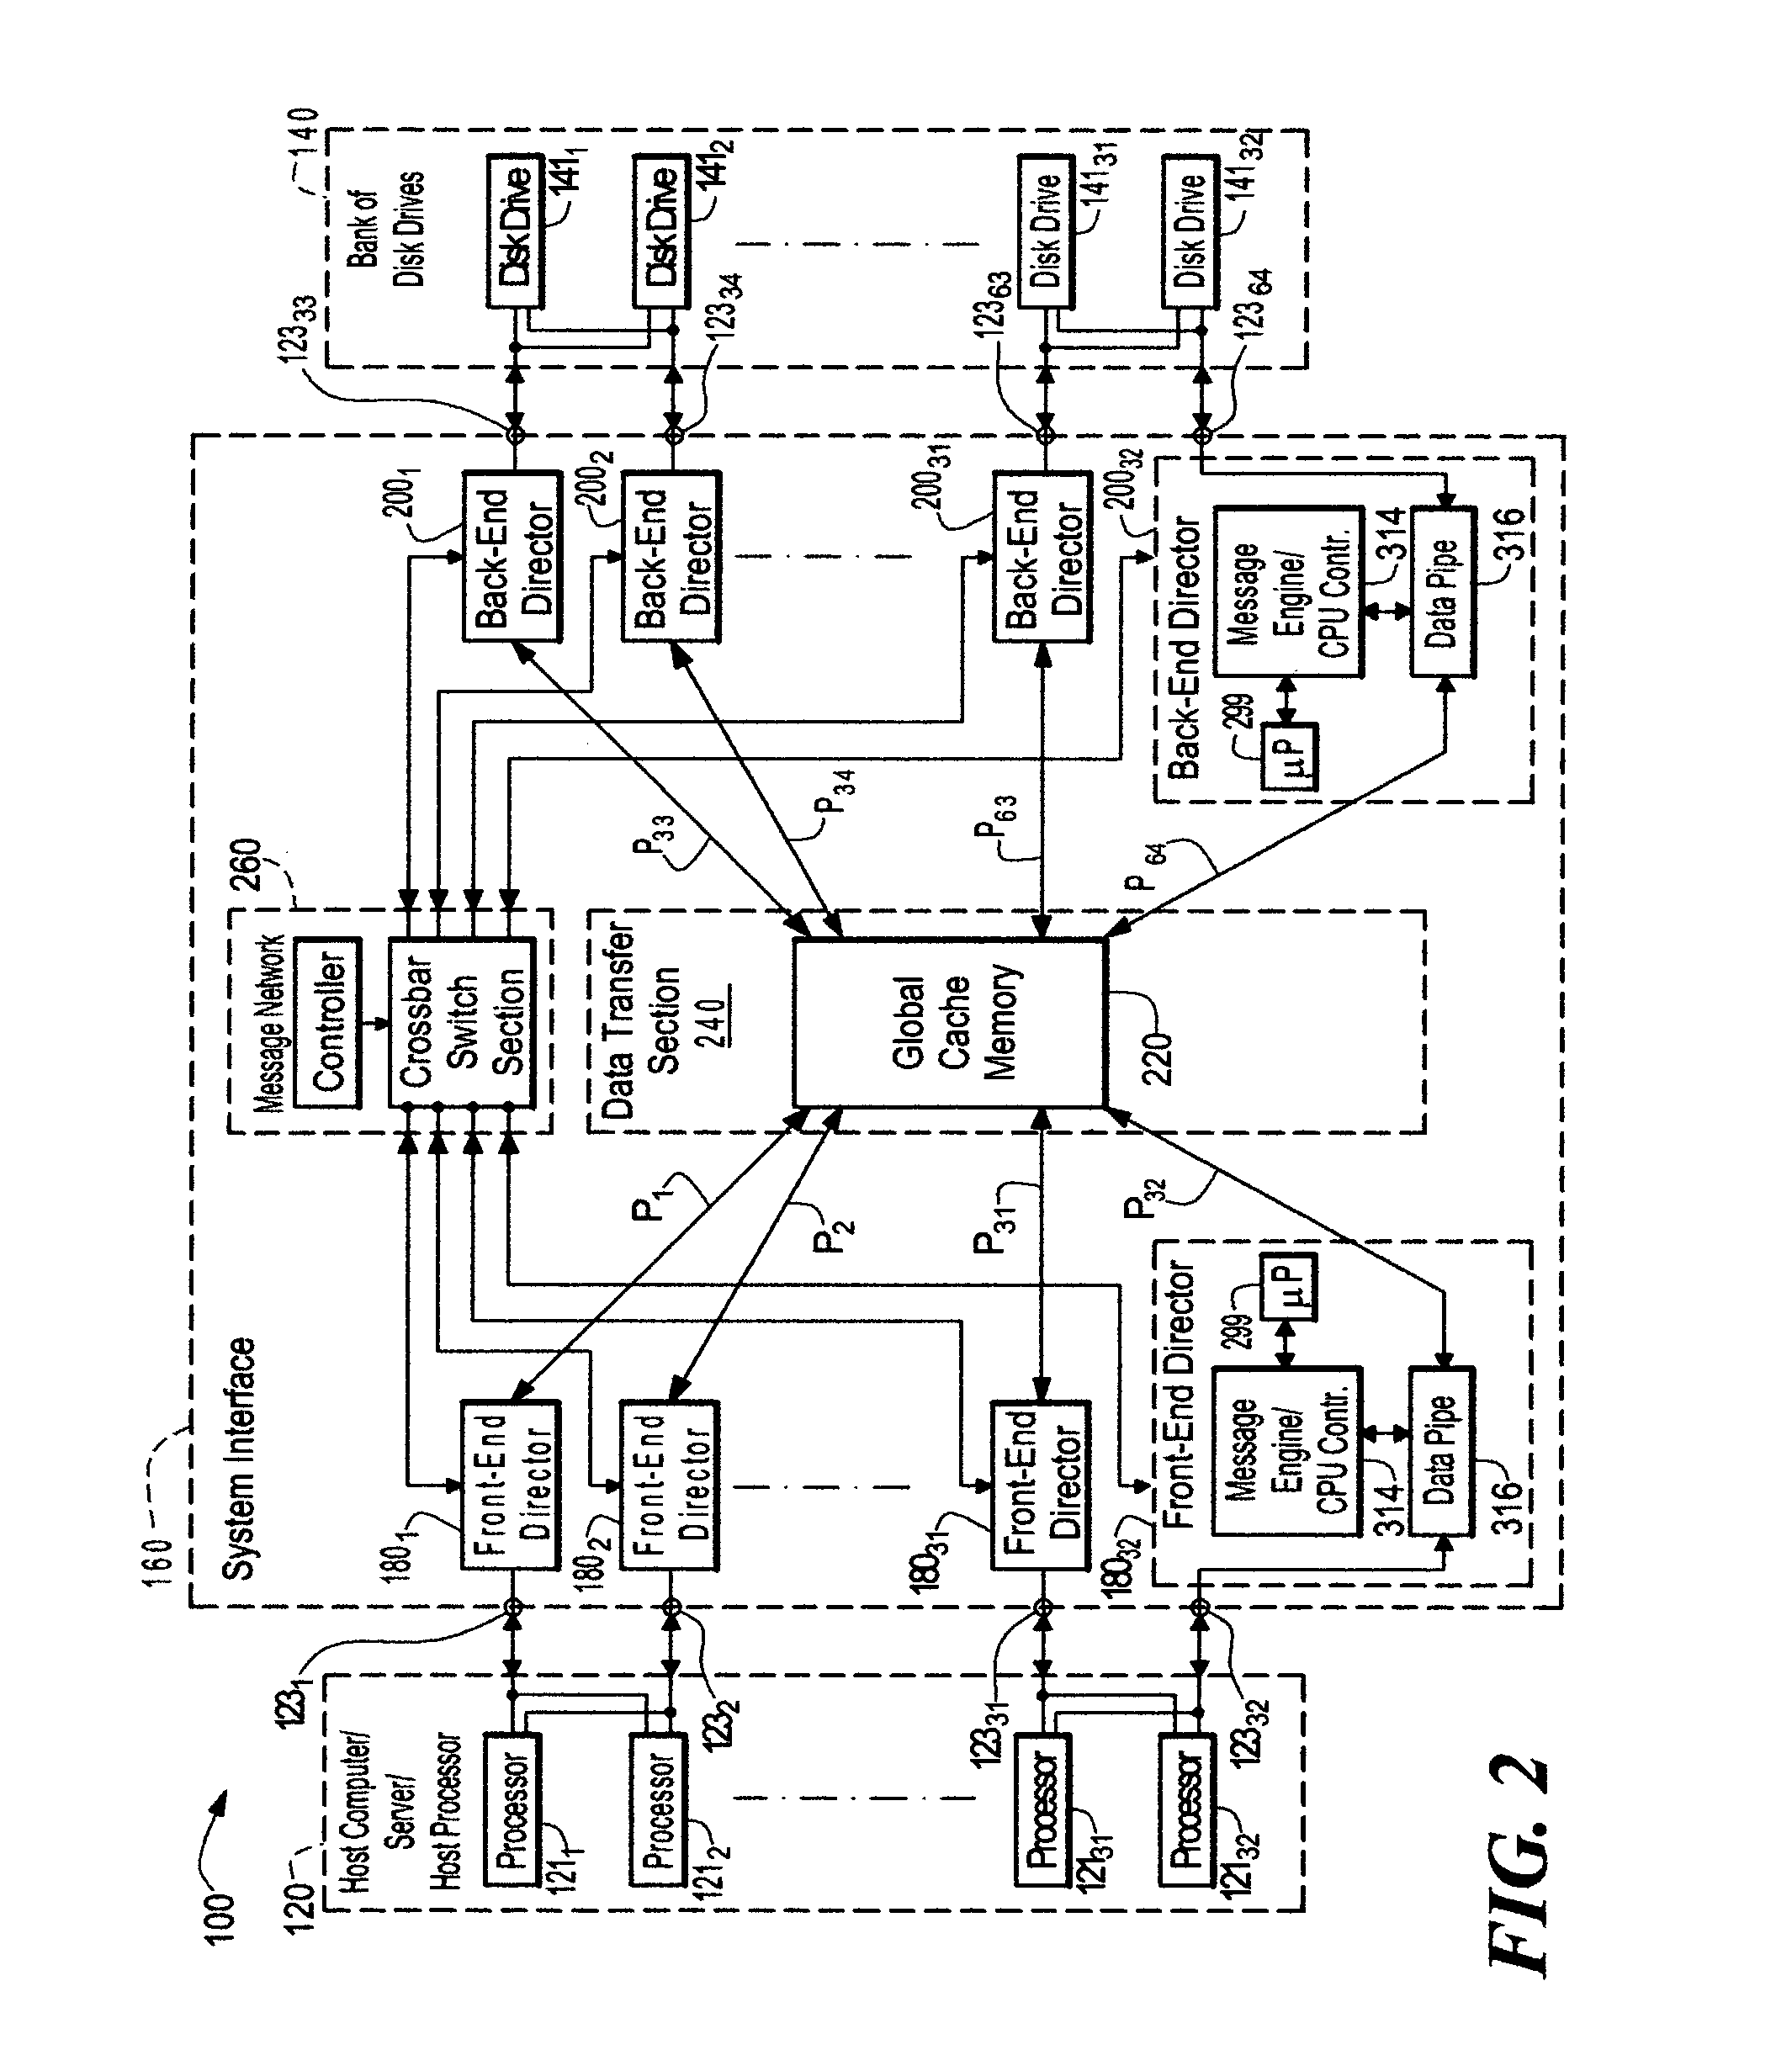 Data storage system having point-to-point configuration